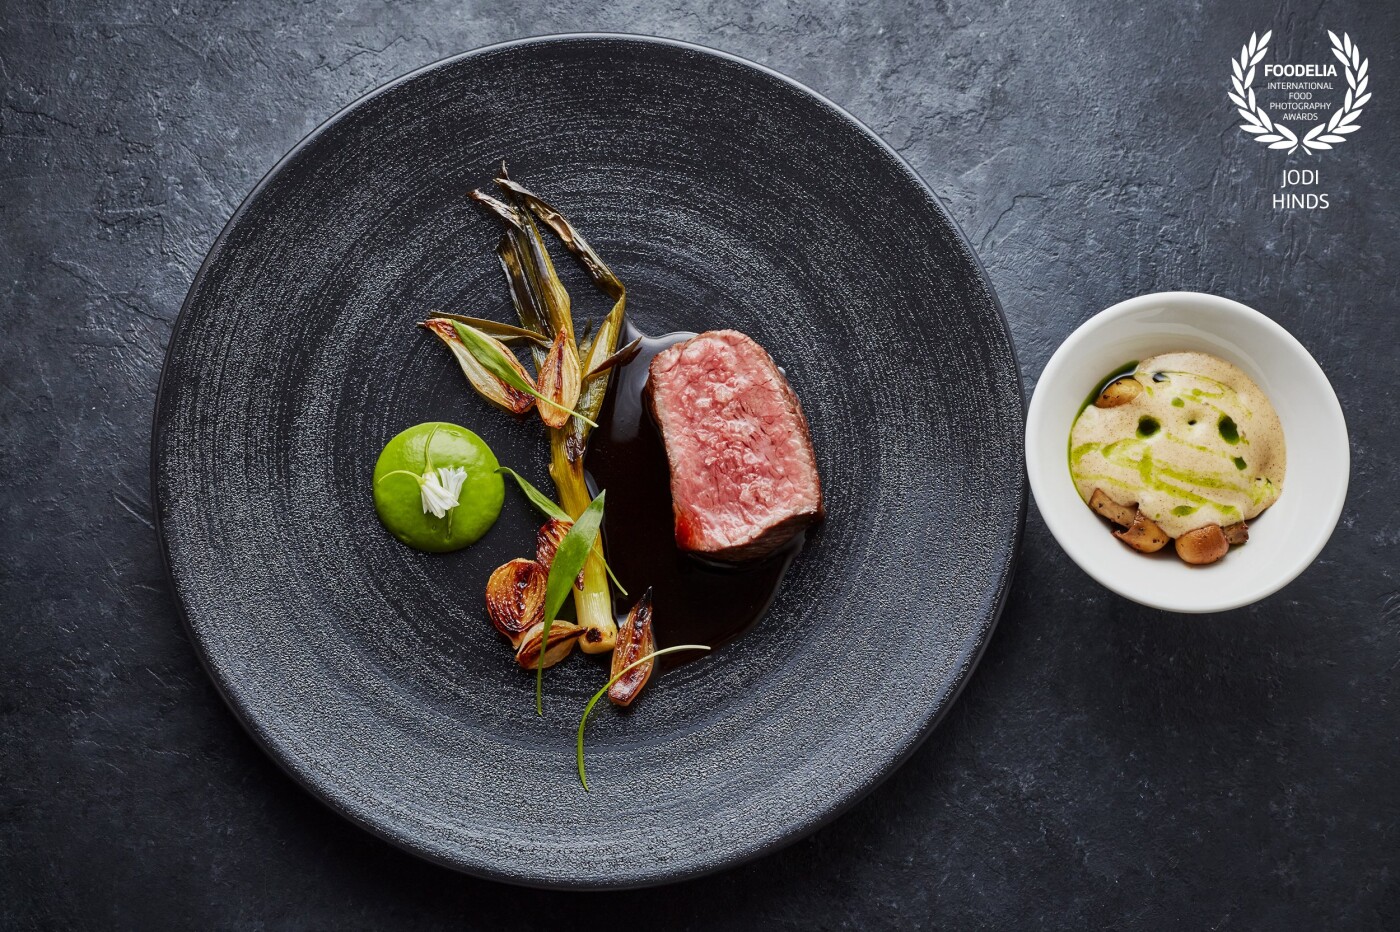 Taken during the Bocuse d'Or UK fundraising dinner - this stunning beef dish is the creation of Simon Rogan with stunning beef supplied by Aubrey Allen.<br />
The Bocuse d'Or is the world's most prestigious culinary competition and Team UK are active in reaching the podium.<br />
@bocusedor @bocusedoruk<br />
 @rogan_simon @roganic @lenclume<br />
@aubreyallenbutchers<br />
@simon_the_butcher_aubrey_allen